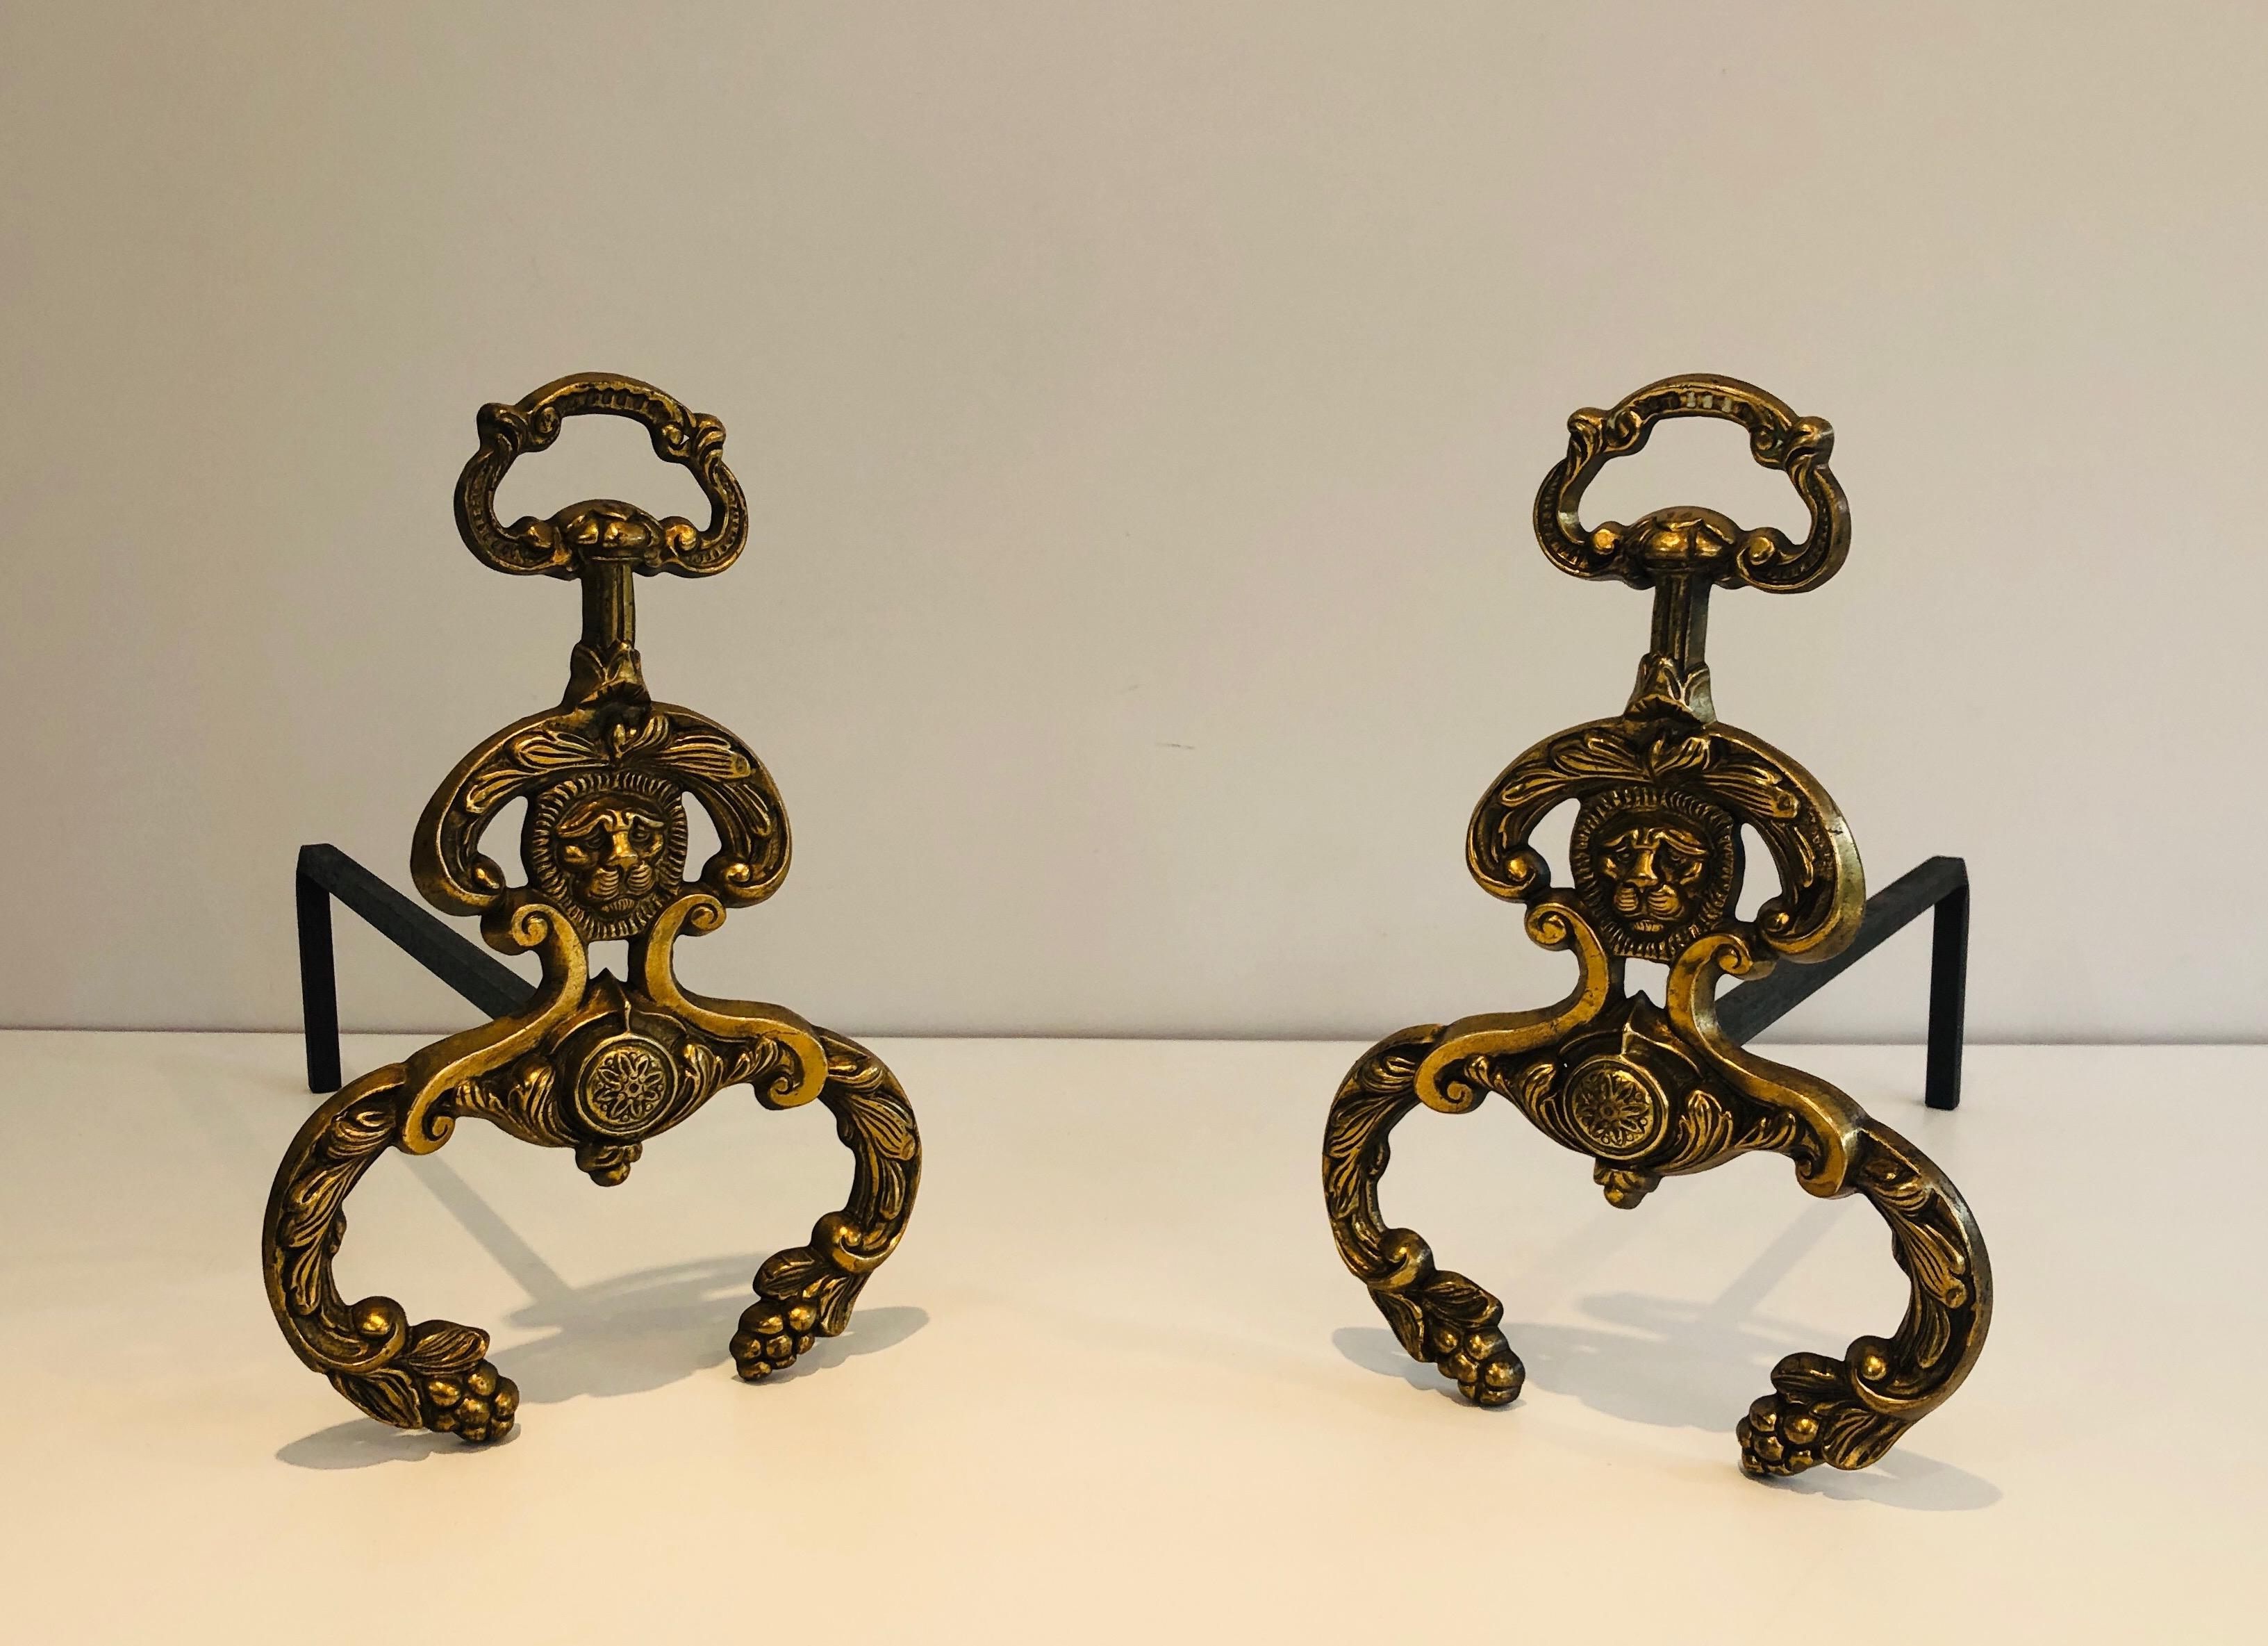 This pair of neoclassical style andirons is made of bronze and wrought iron. These firedogs have lion faces medallions. This is a French work, circa 1940.